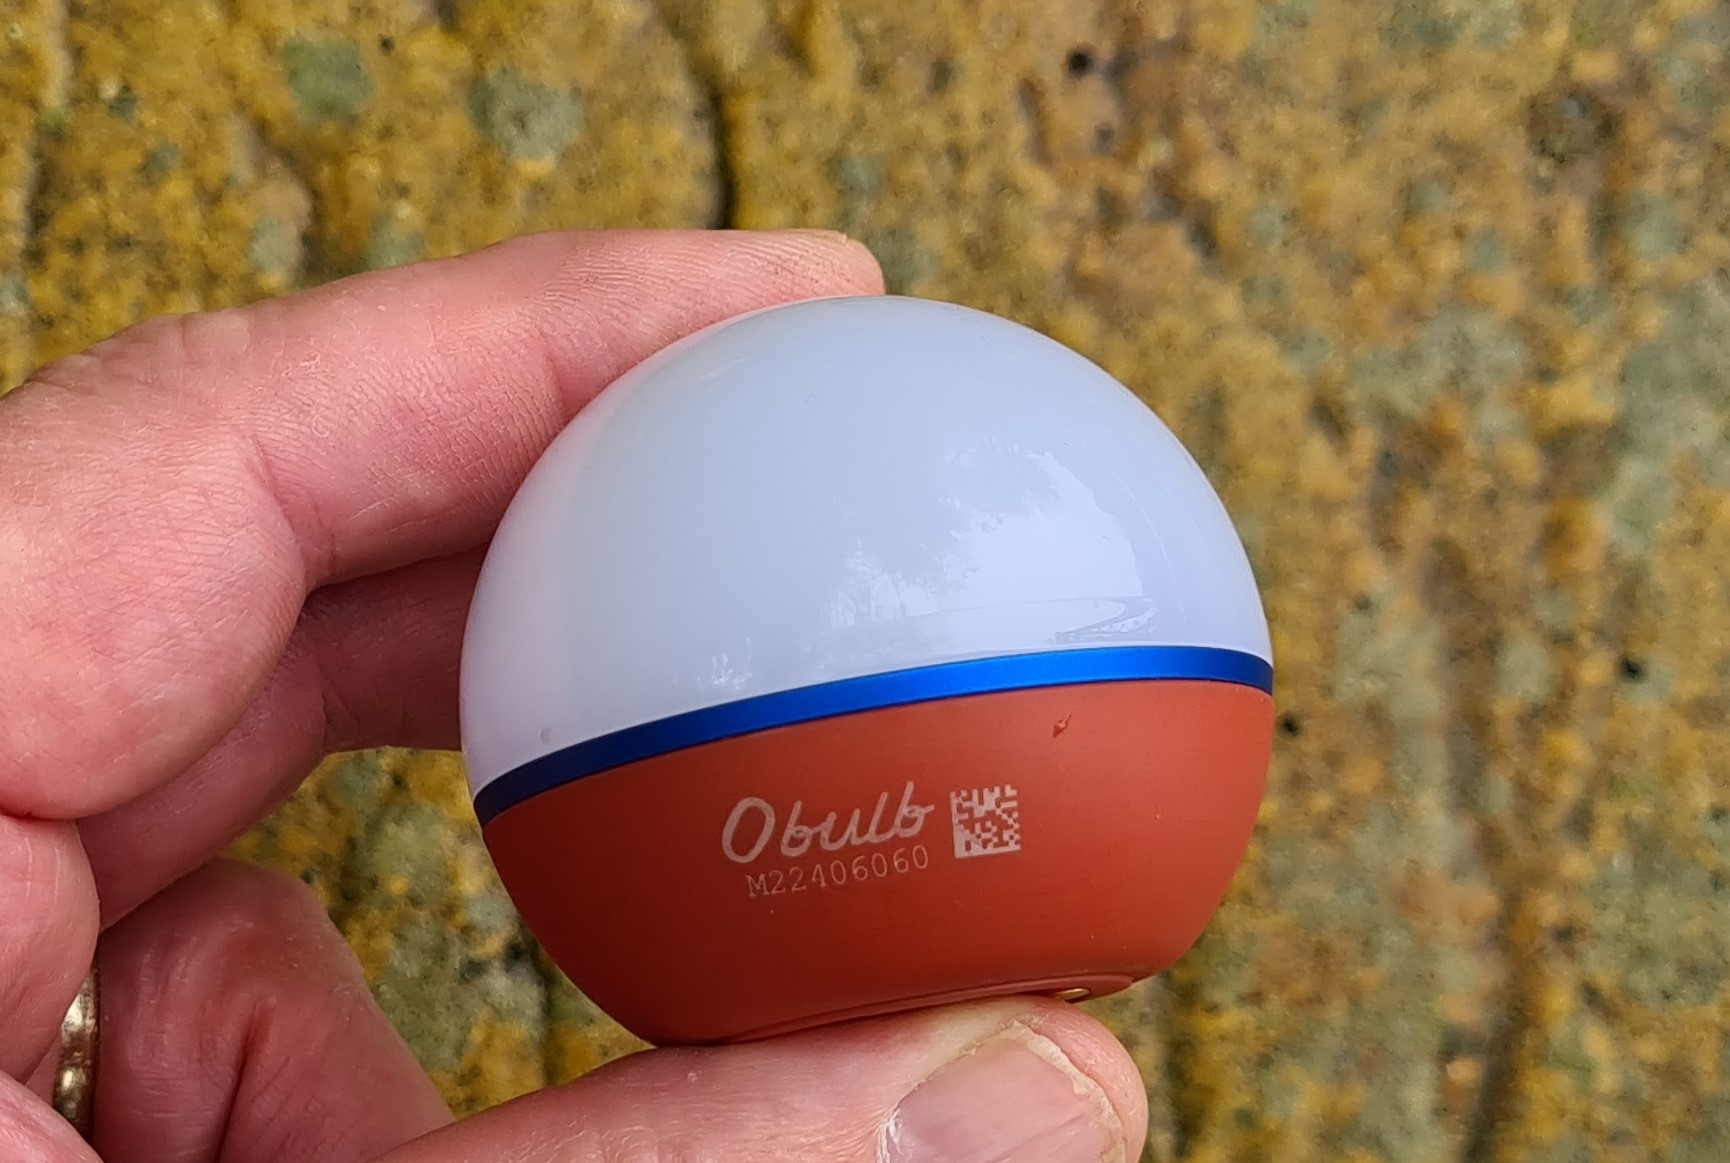 Obulb is quite small in the hand- larger than a golfball, smaller than a tennis ball